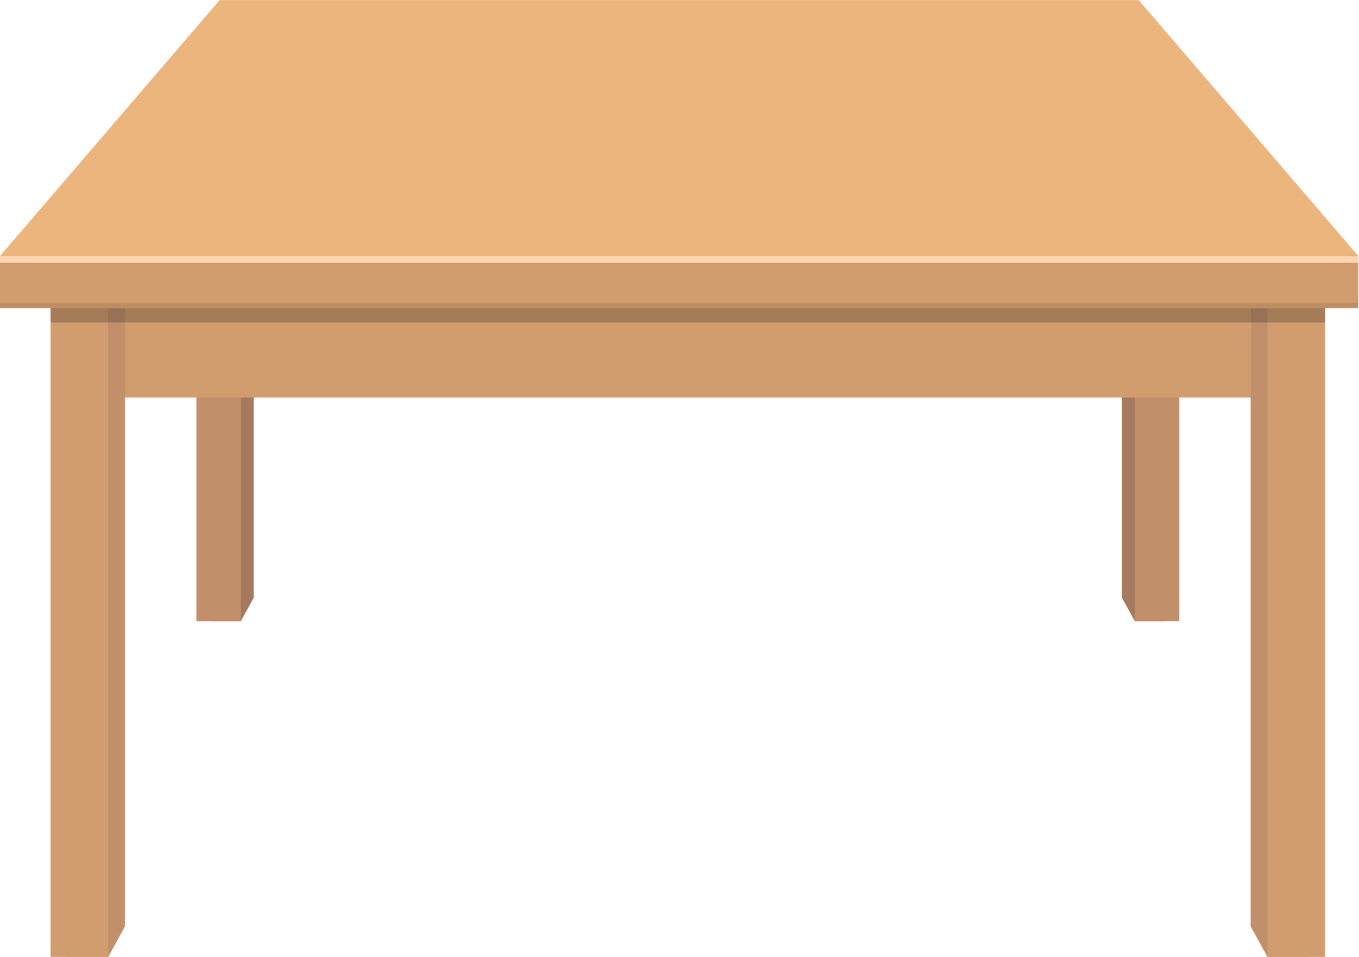 Wooden Table